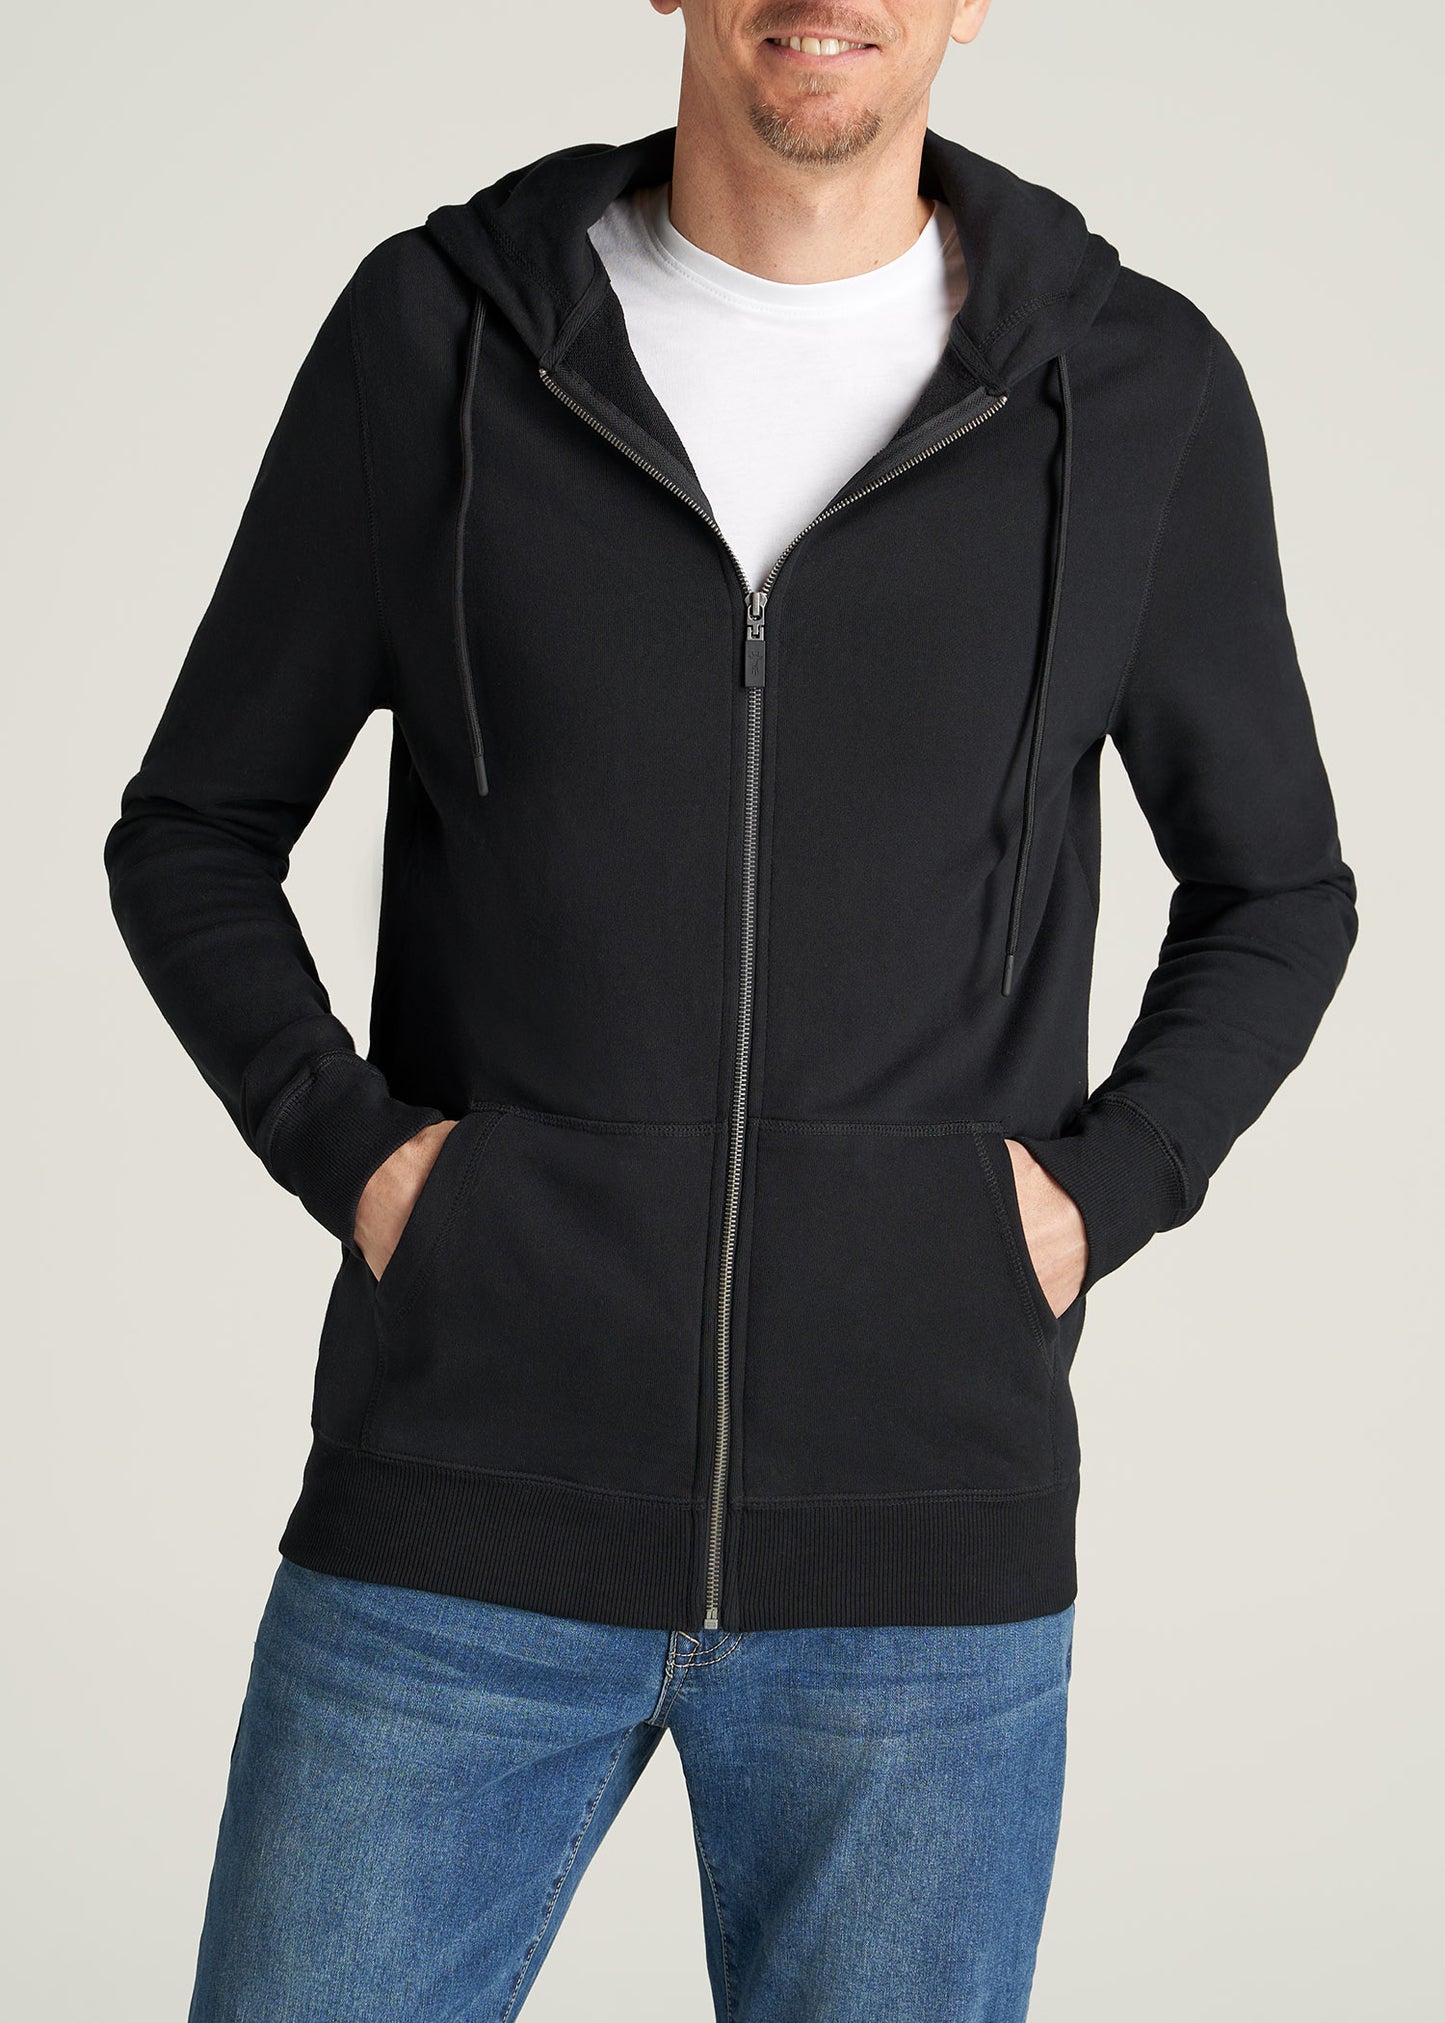 American-Tall-Men-8020-FrenchTerry-FullZip-Hoodie-Black-front